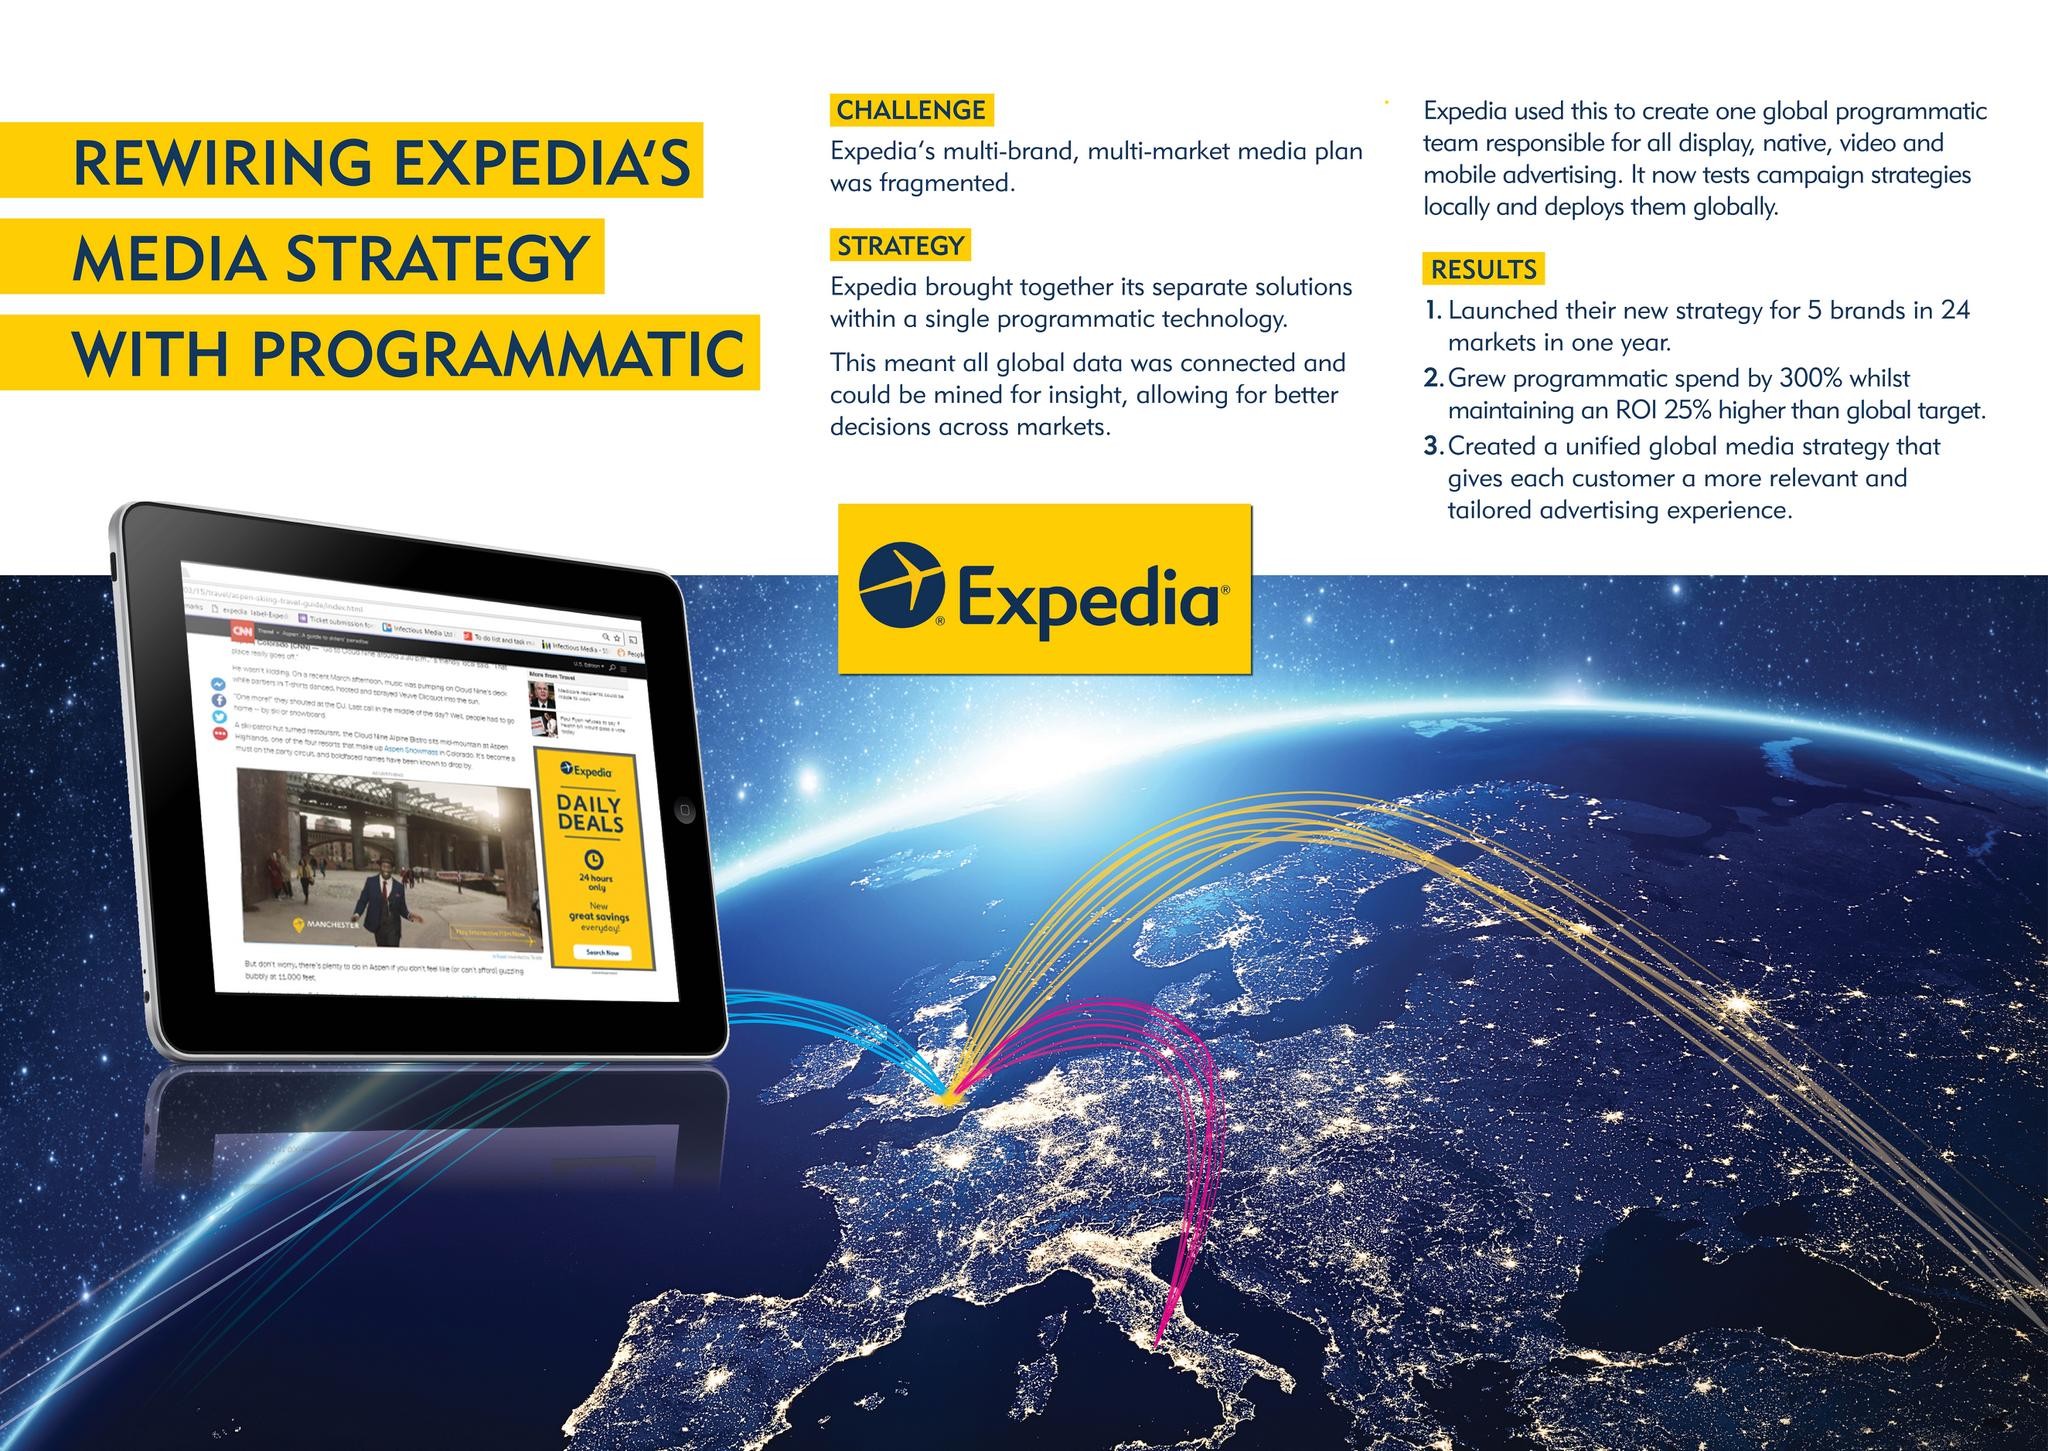 Re-wiring Expedia's media strategy with programmatic